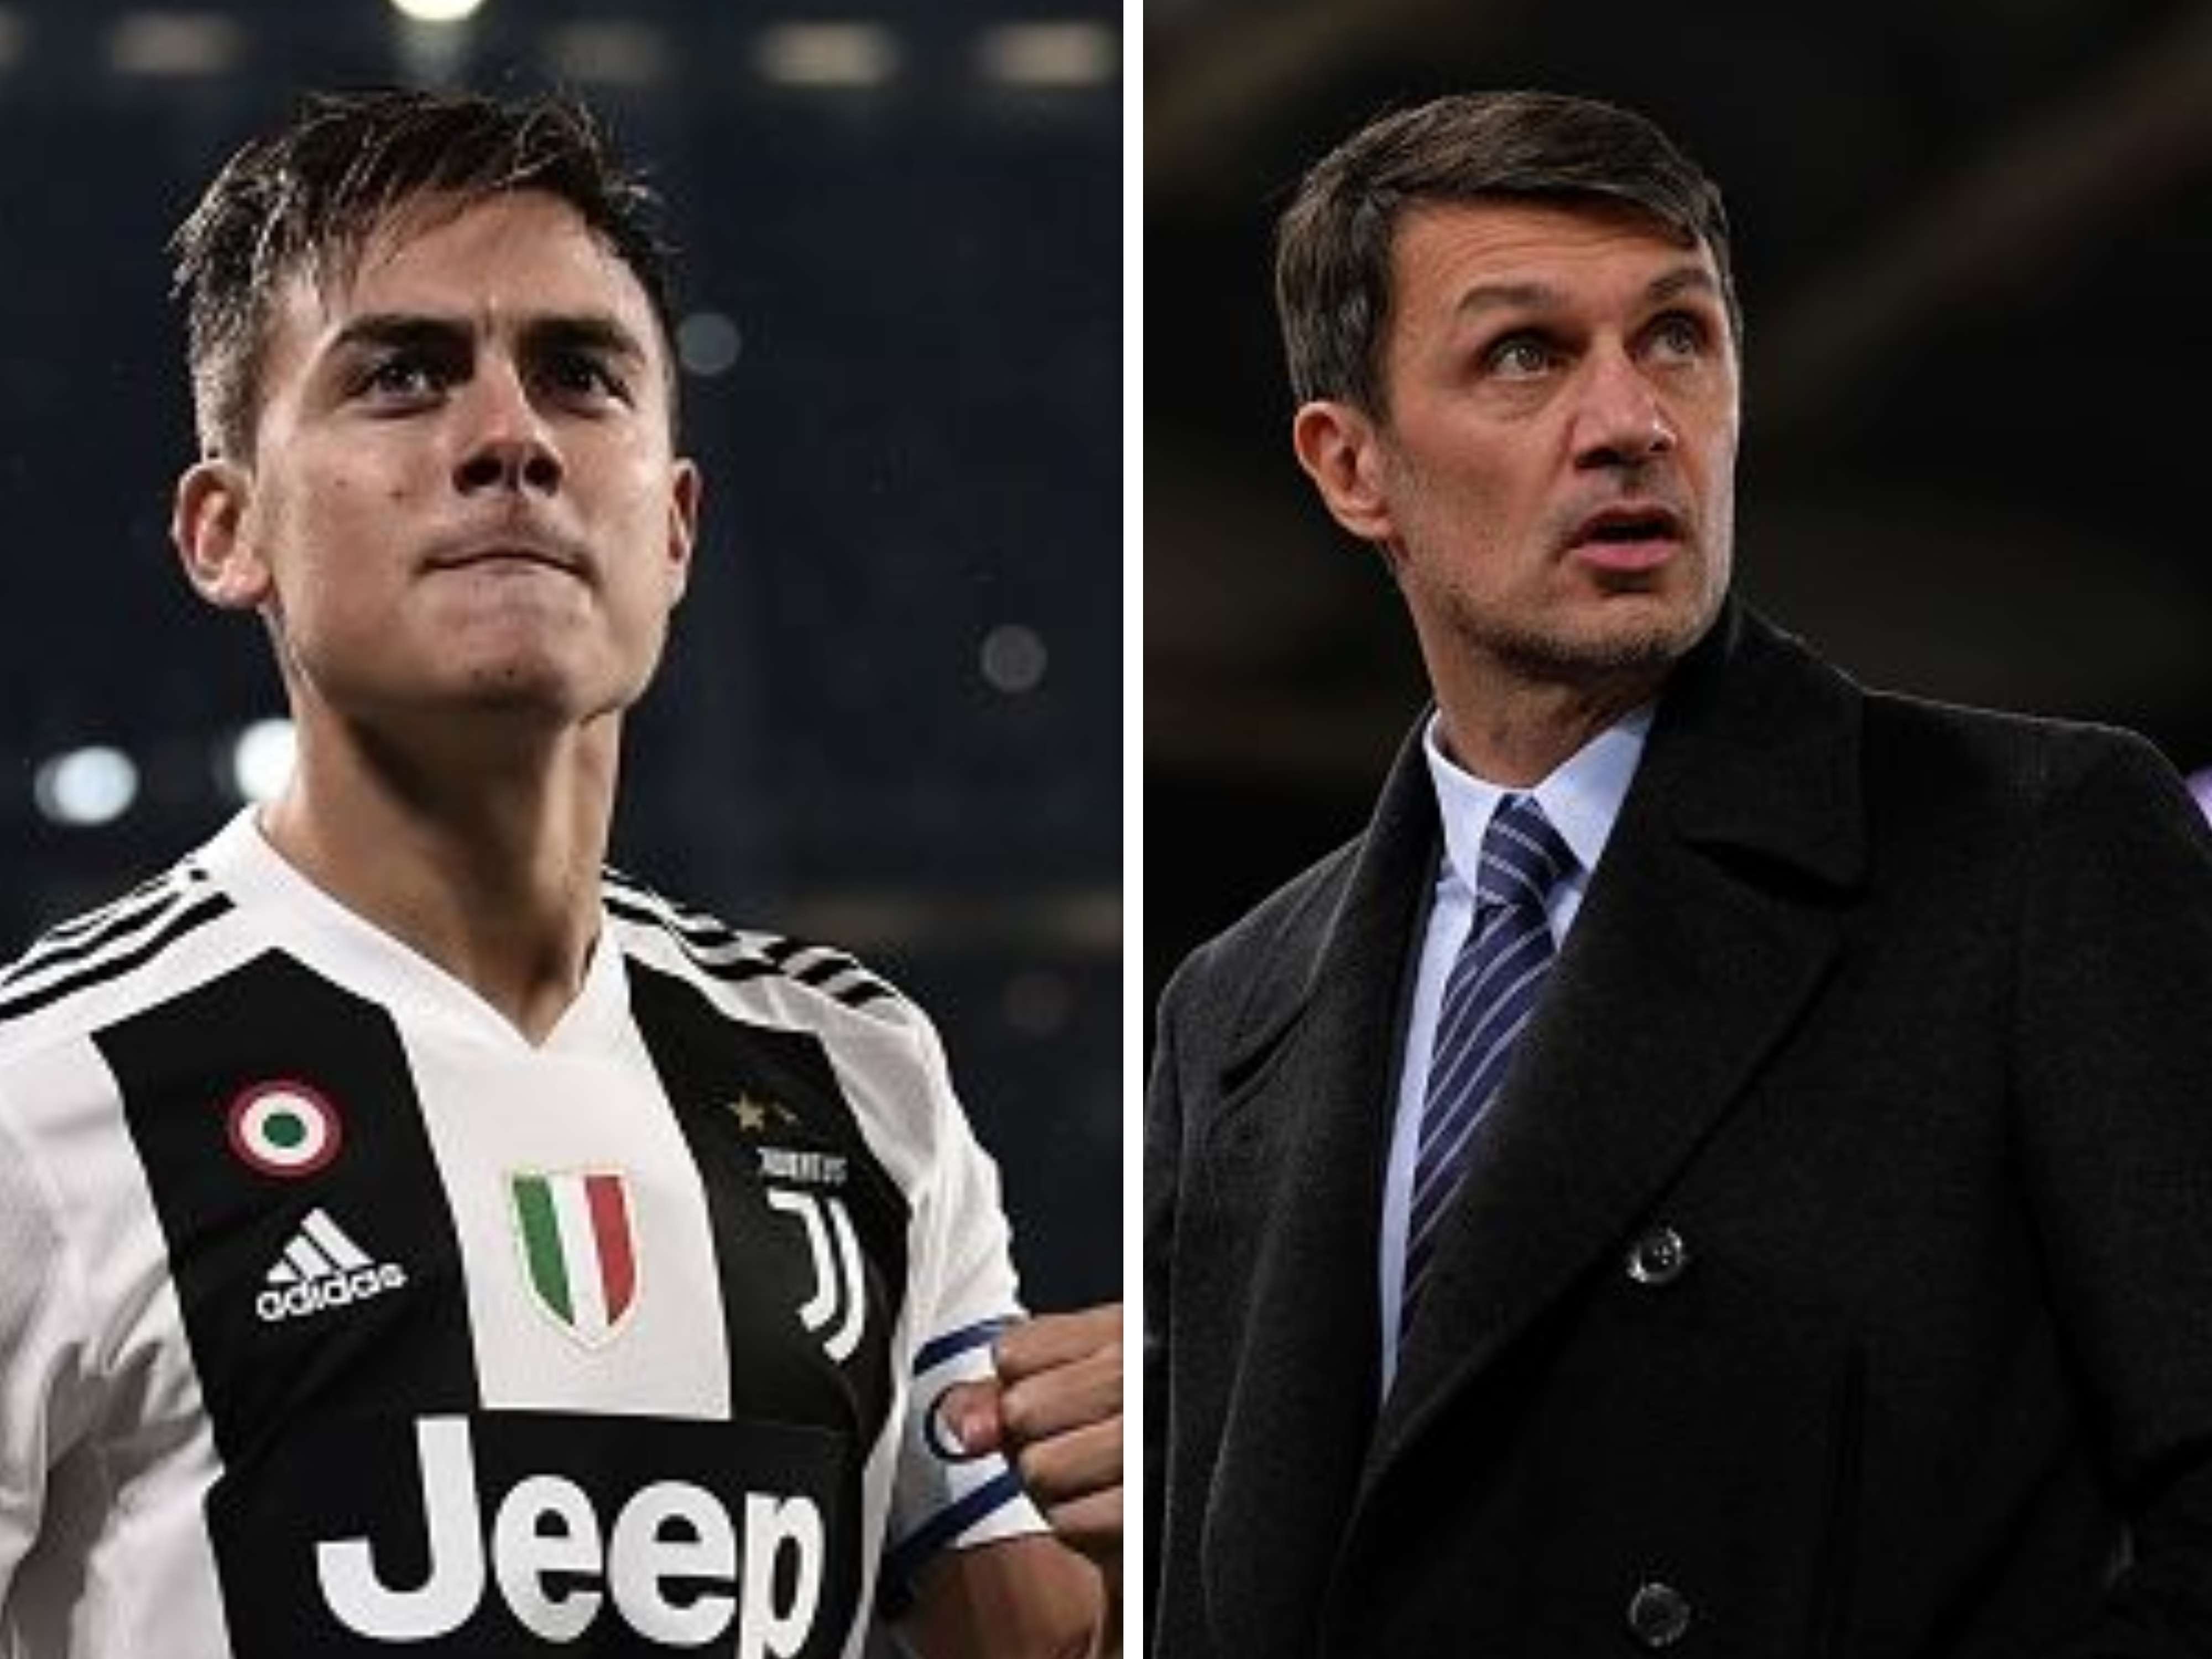 Paulo Dybala, left, and Paolo Maldini (Getty Images)